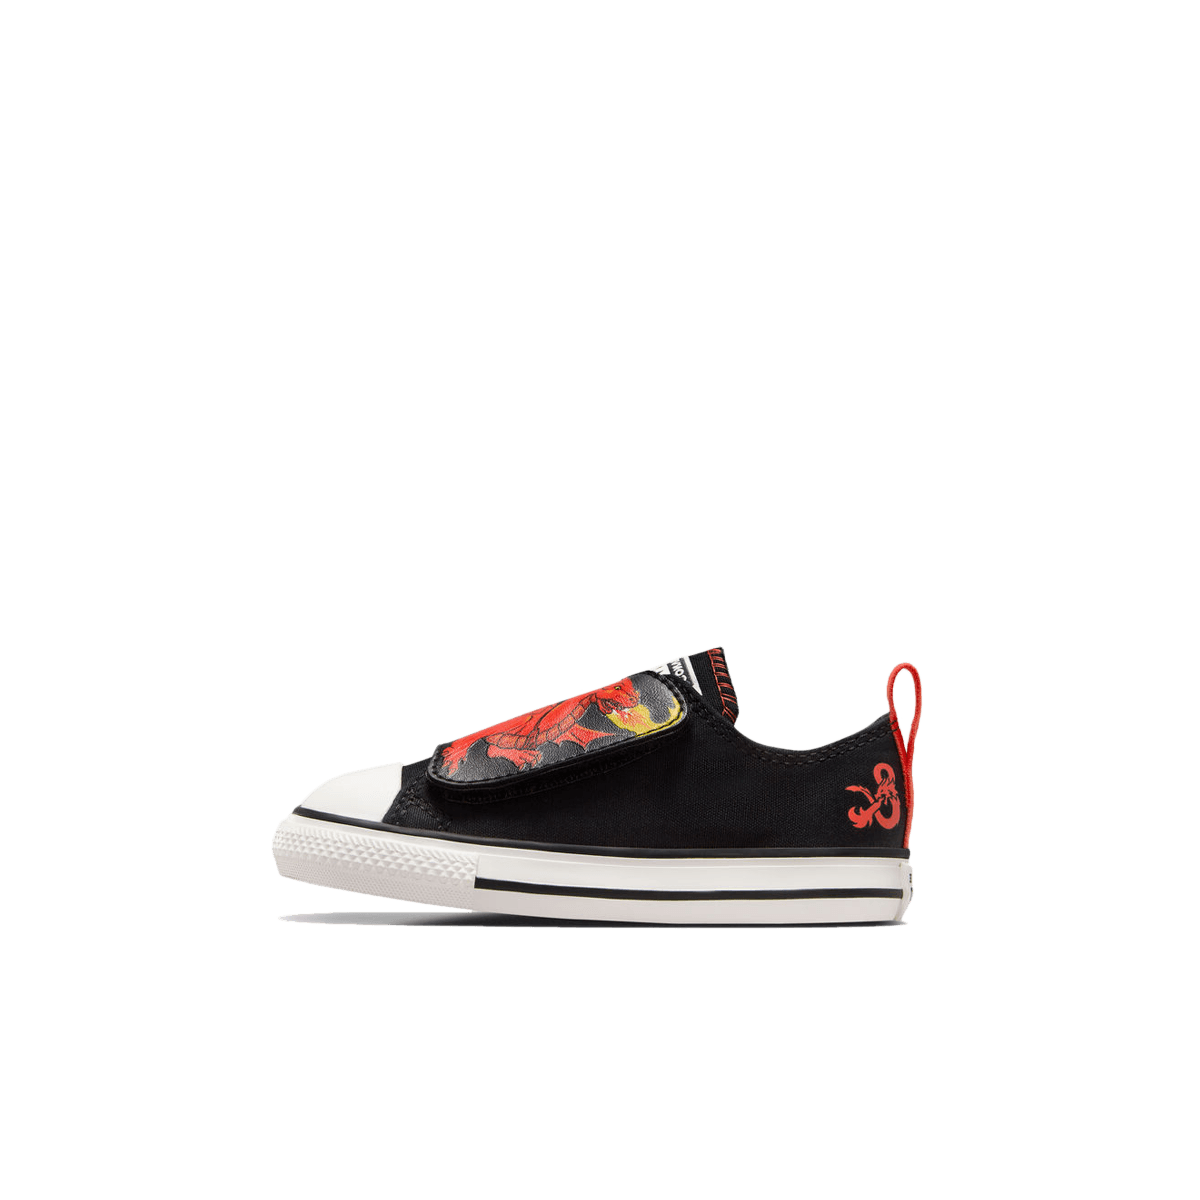 Dungeons & Dragons x Converse Chuck Taylor All Star TD 'Red Dragon' A09888C